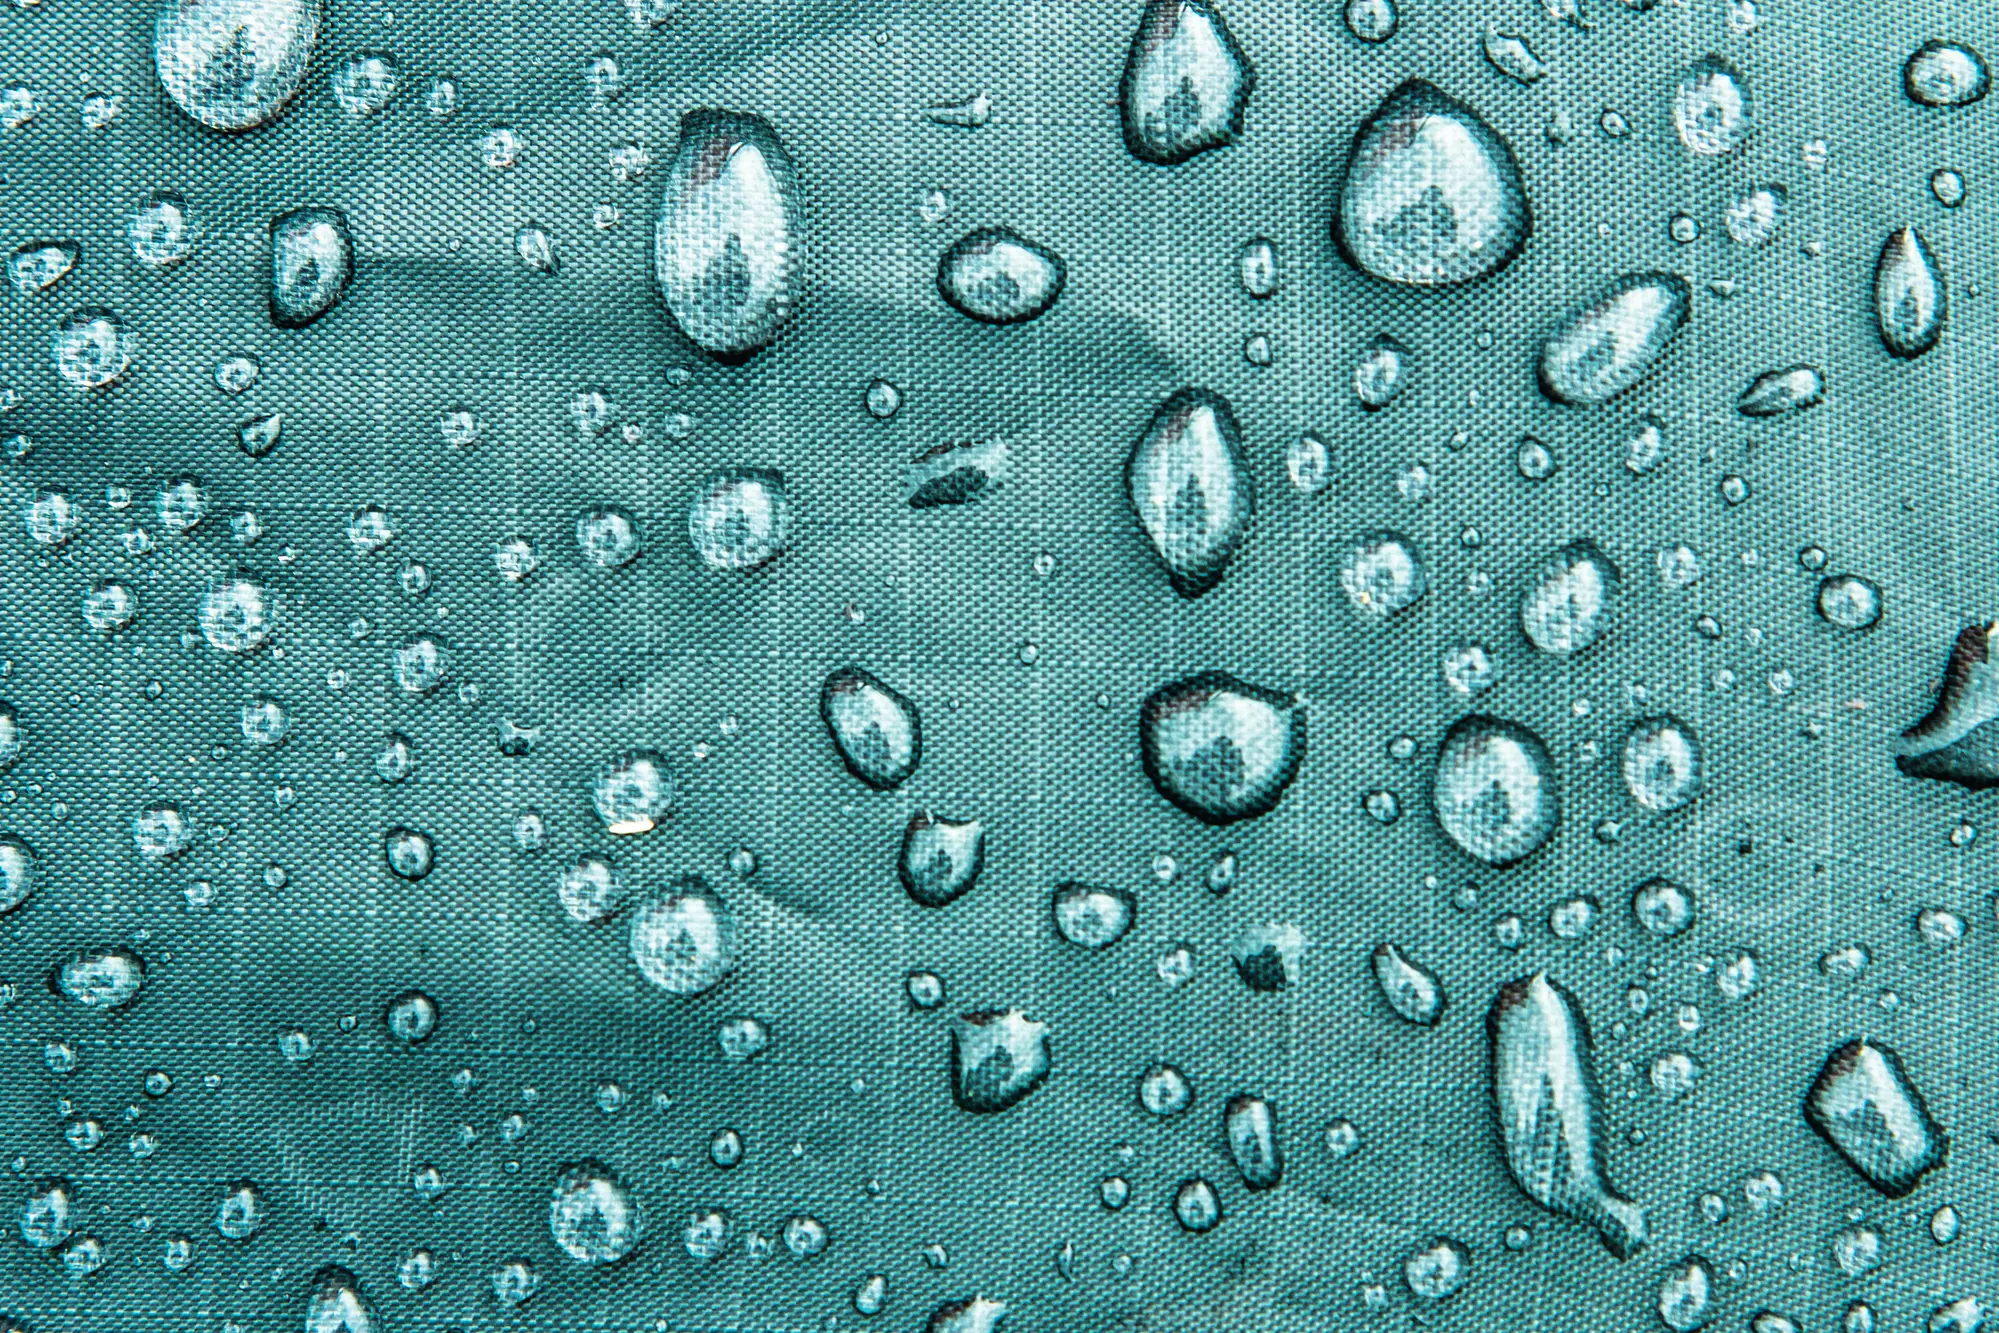 Waterdrops on blue fabric